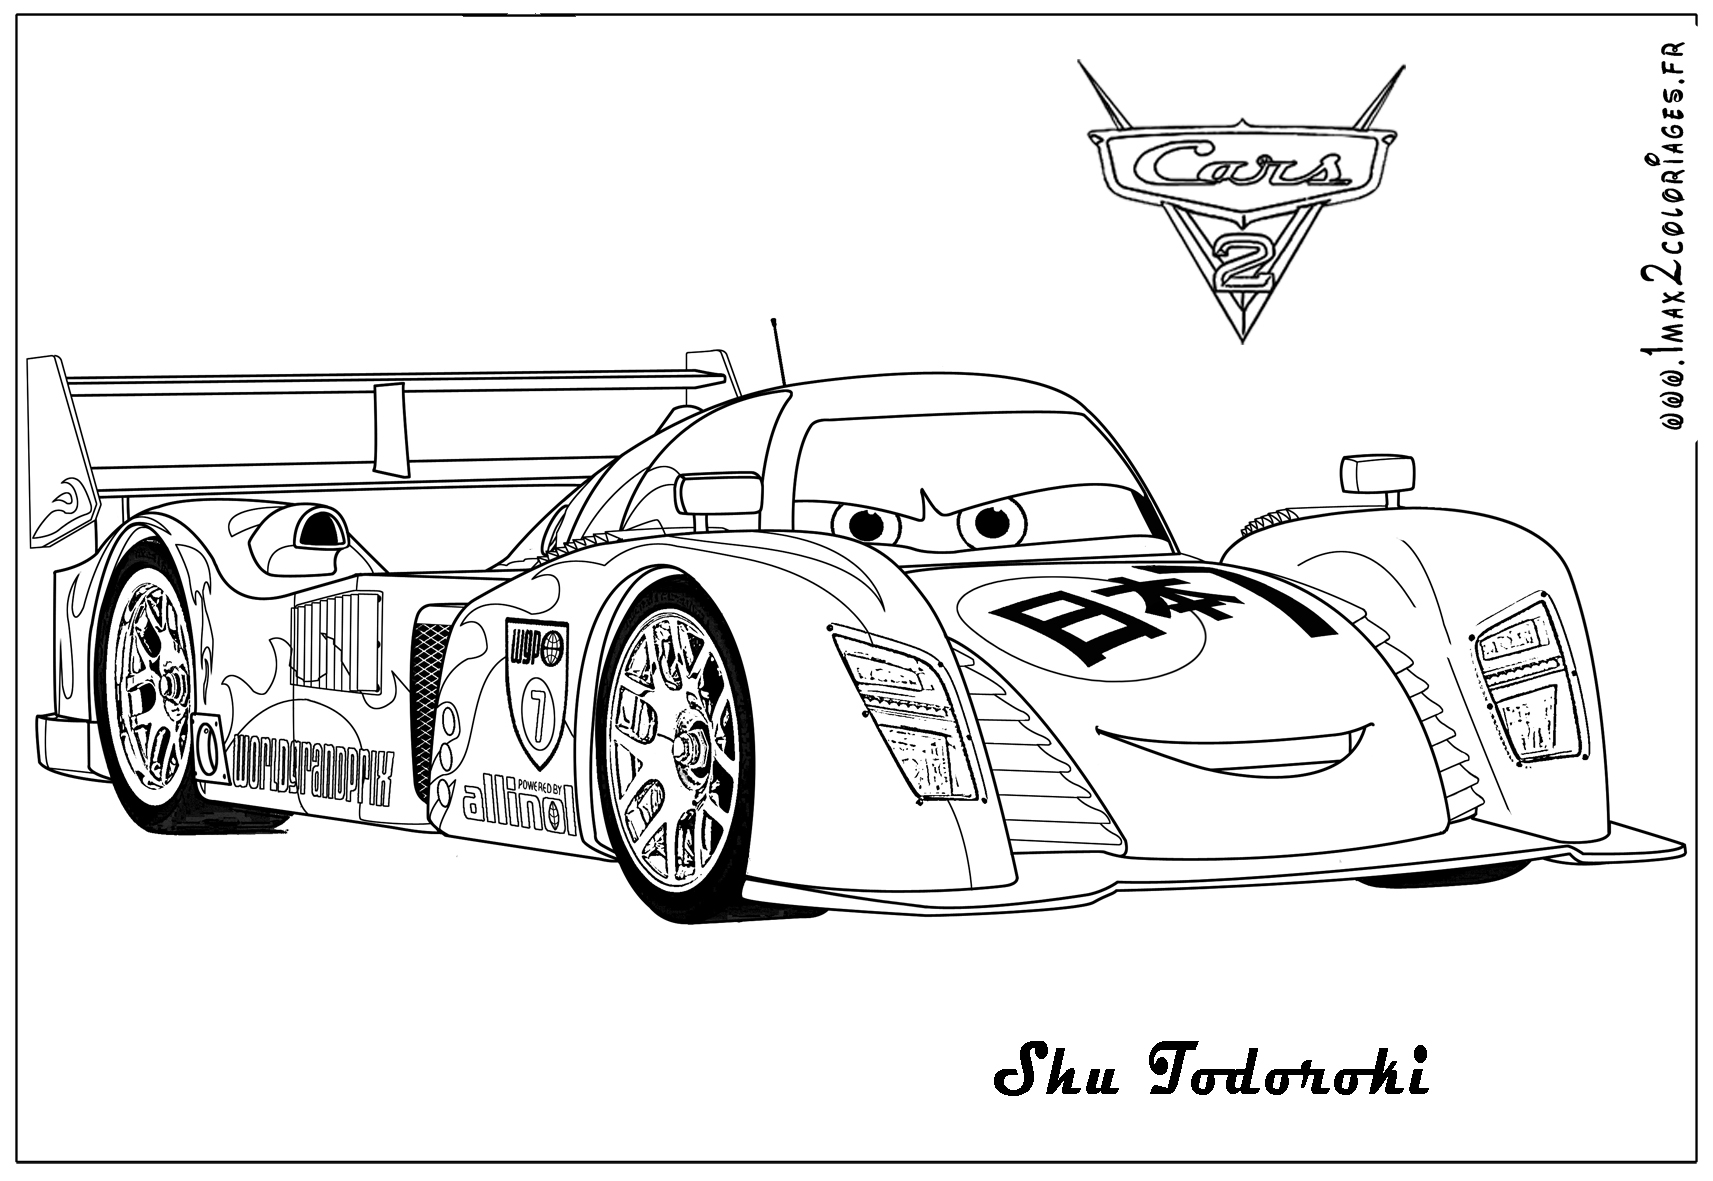 860 Coloring Pages Cars 2 Images & Pictures In HD